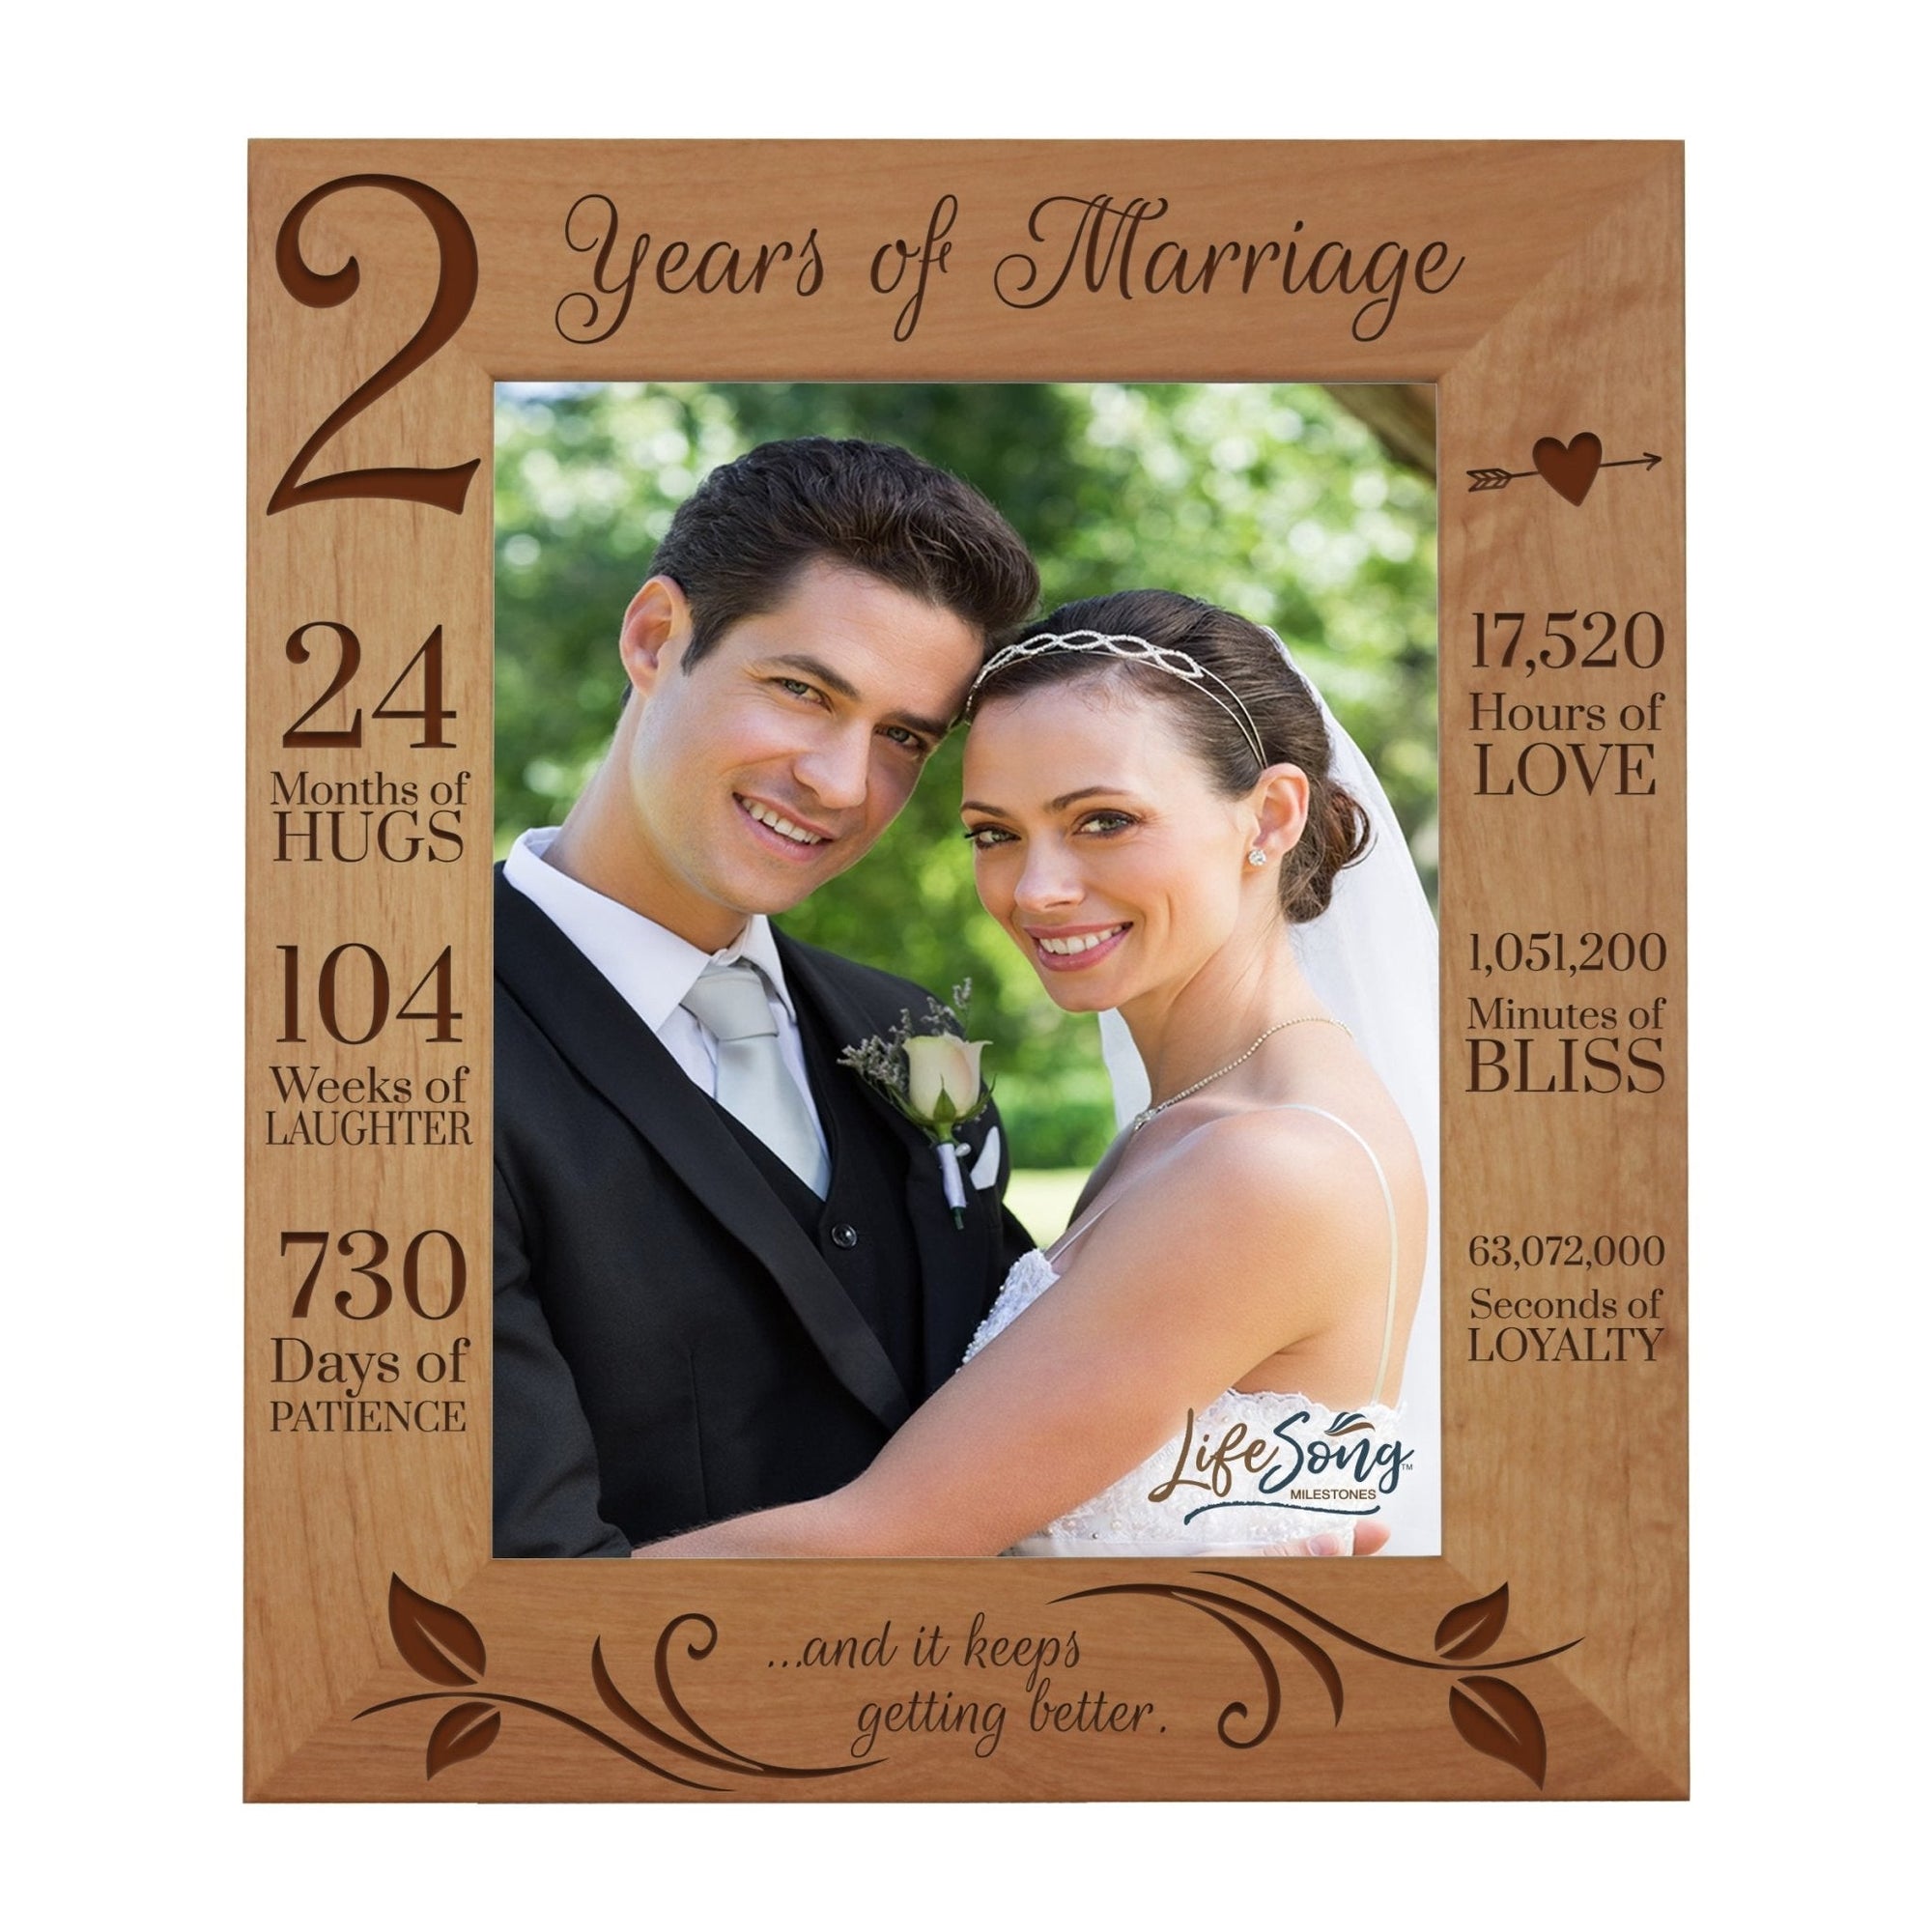 Couples 2nd Wedding Anniversary Photo Frame Home Decor Gift Ideas - Keeps Getting Better - LifeSong Milestones